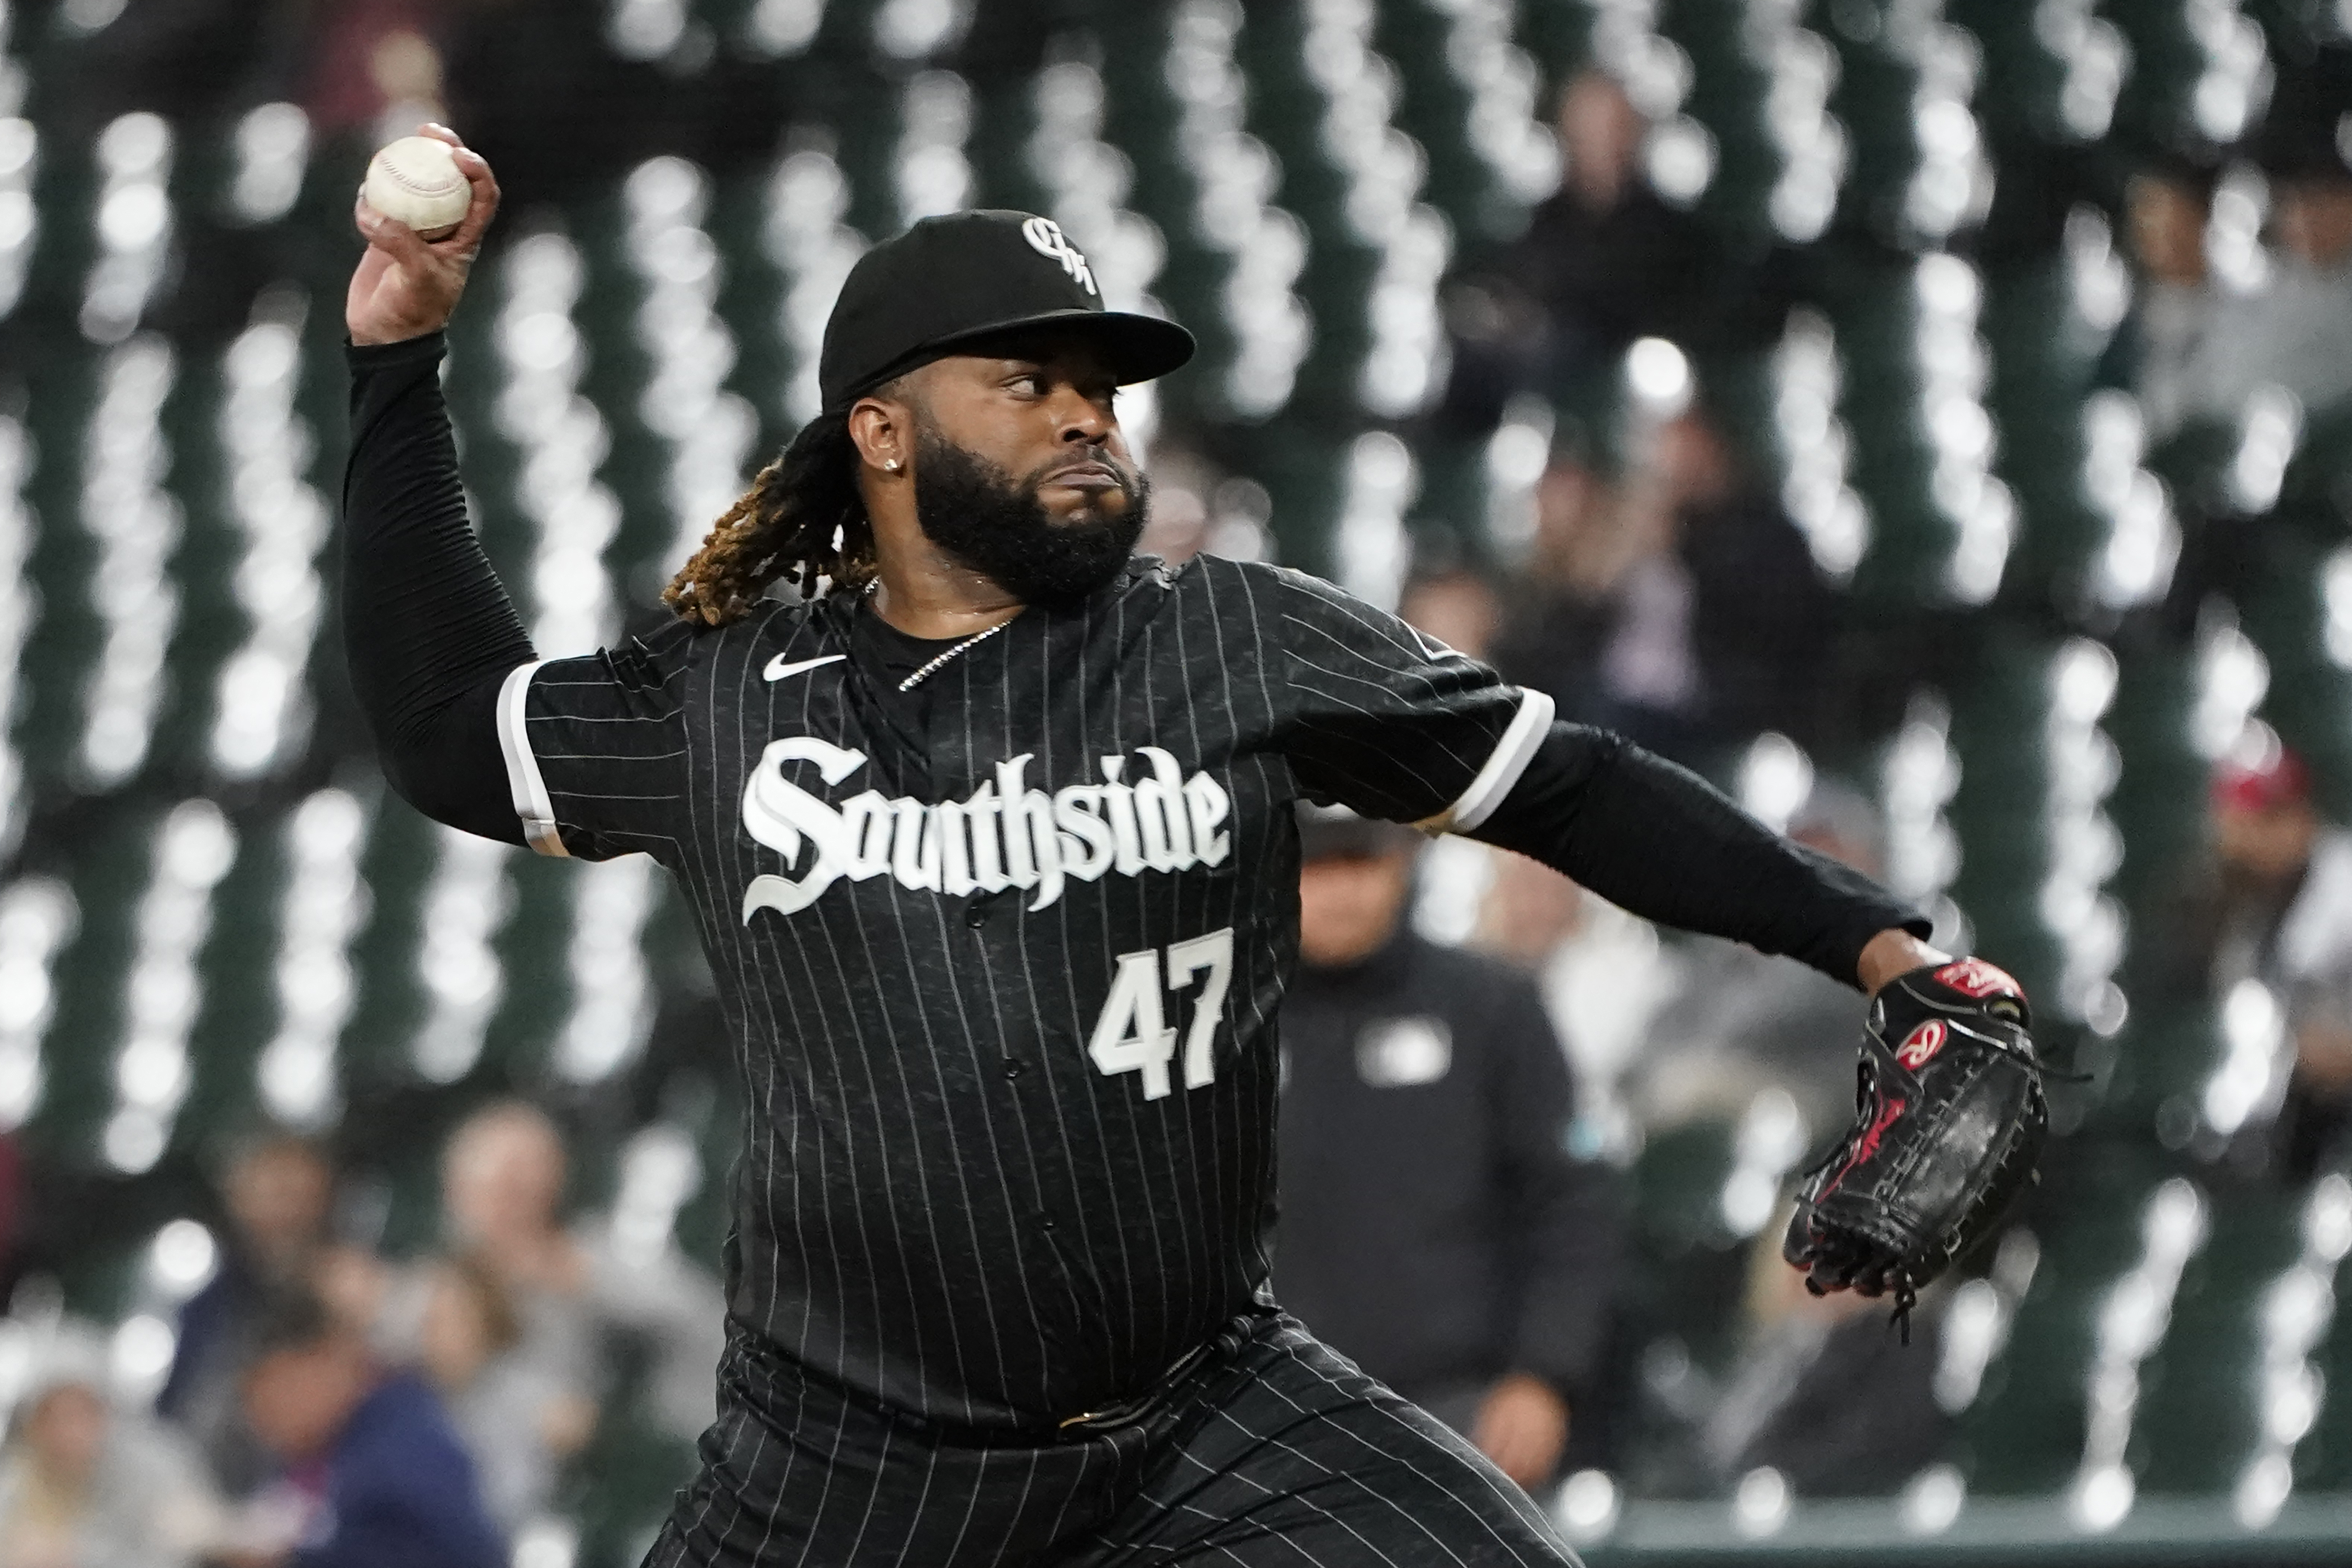 Marlins sign pitcher Johnny Cueto to a one-year contract